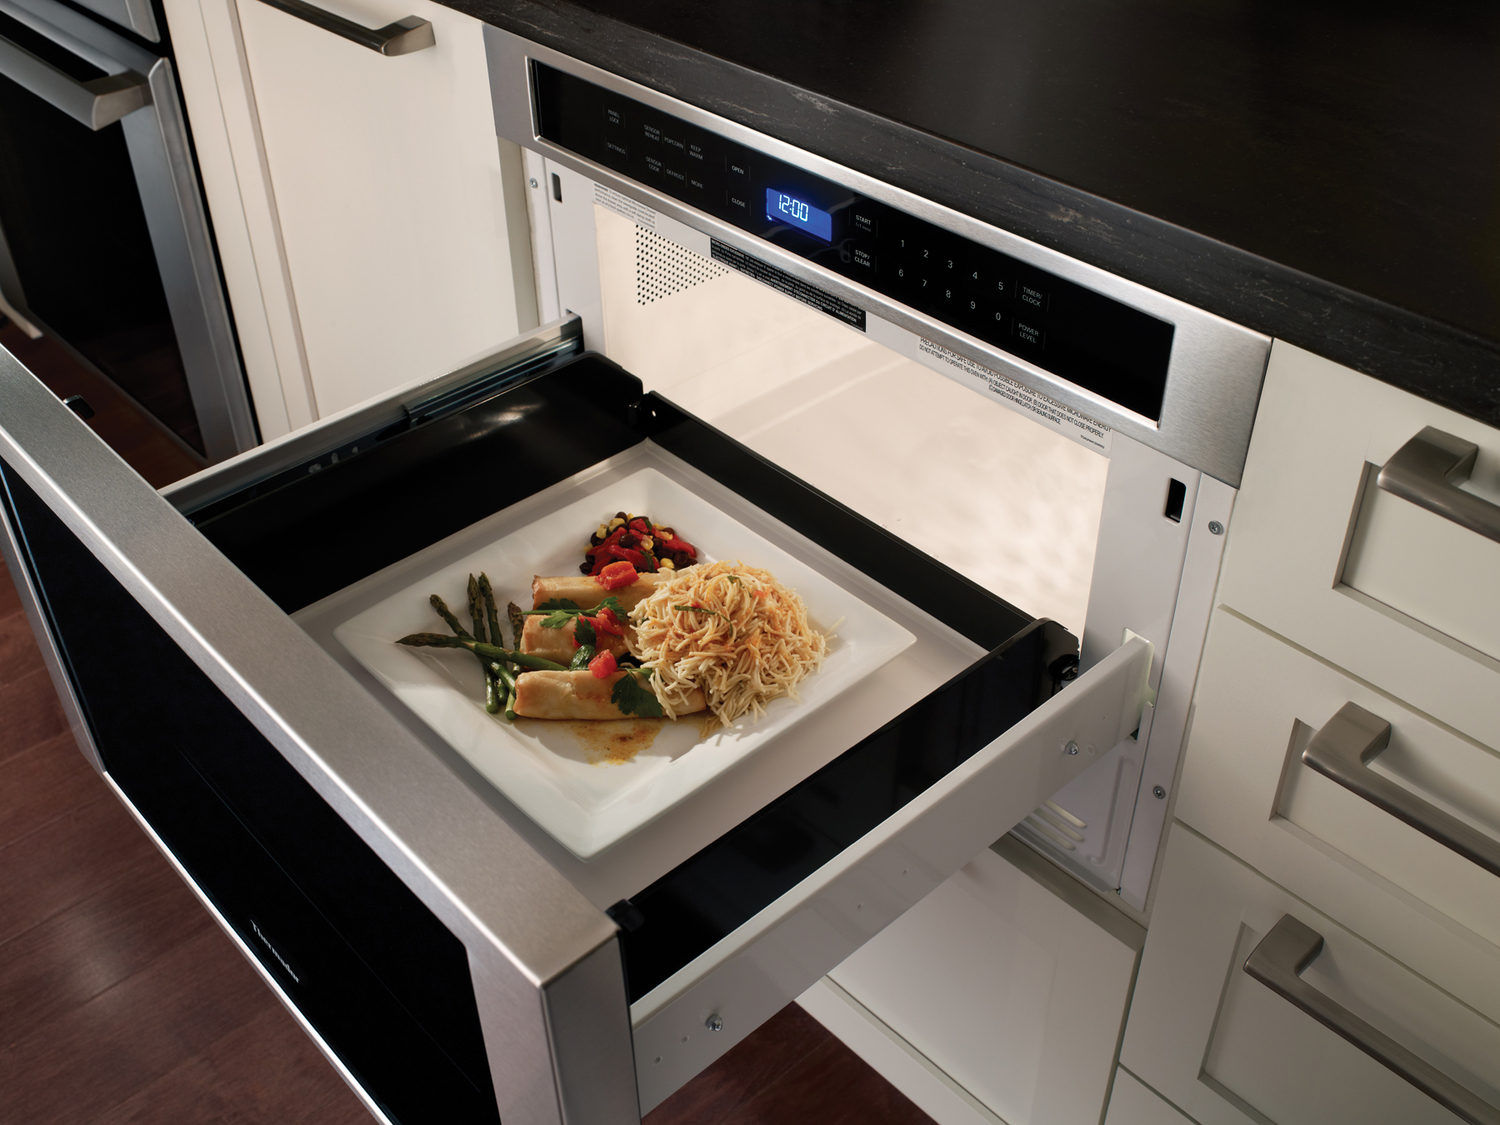 MUSTHAVE Thermador's MicroDrawer Microwave, Reviewed — DESIGNED